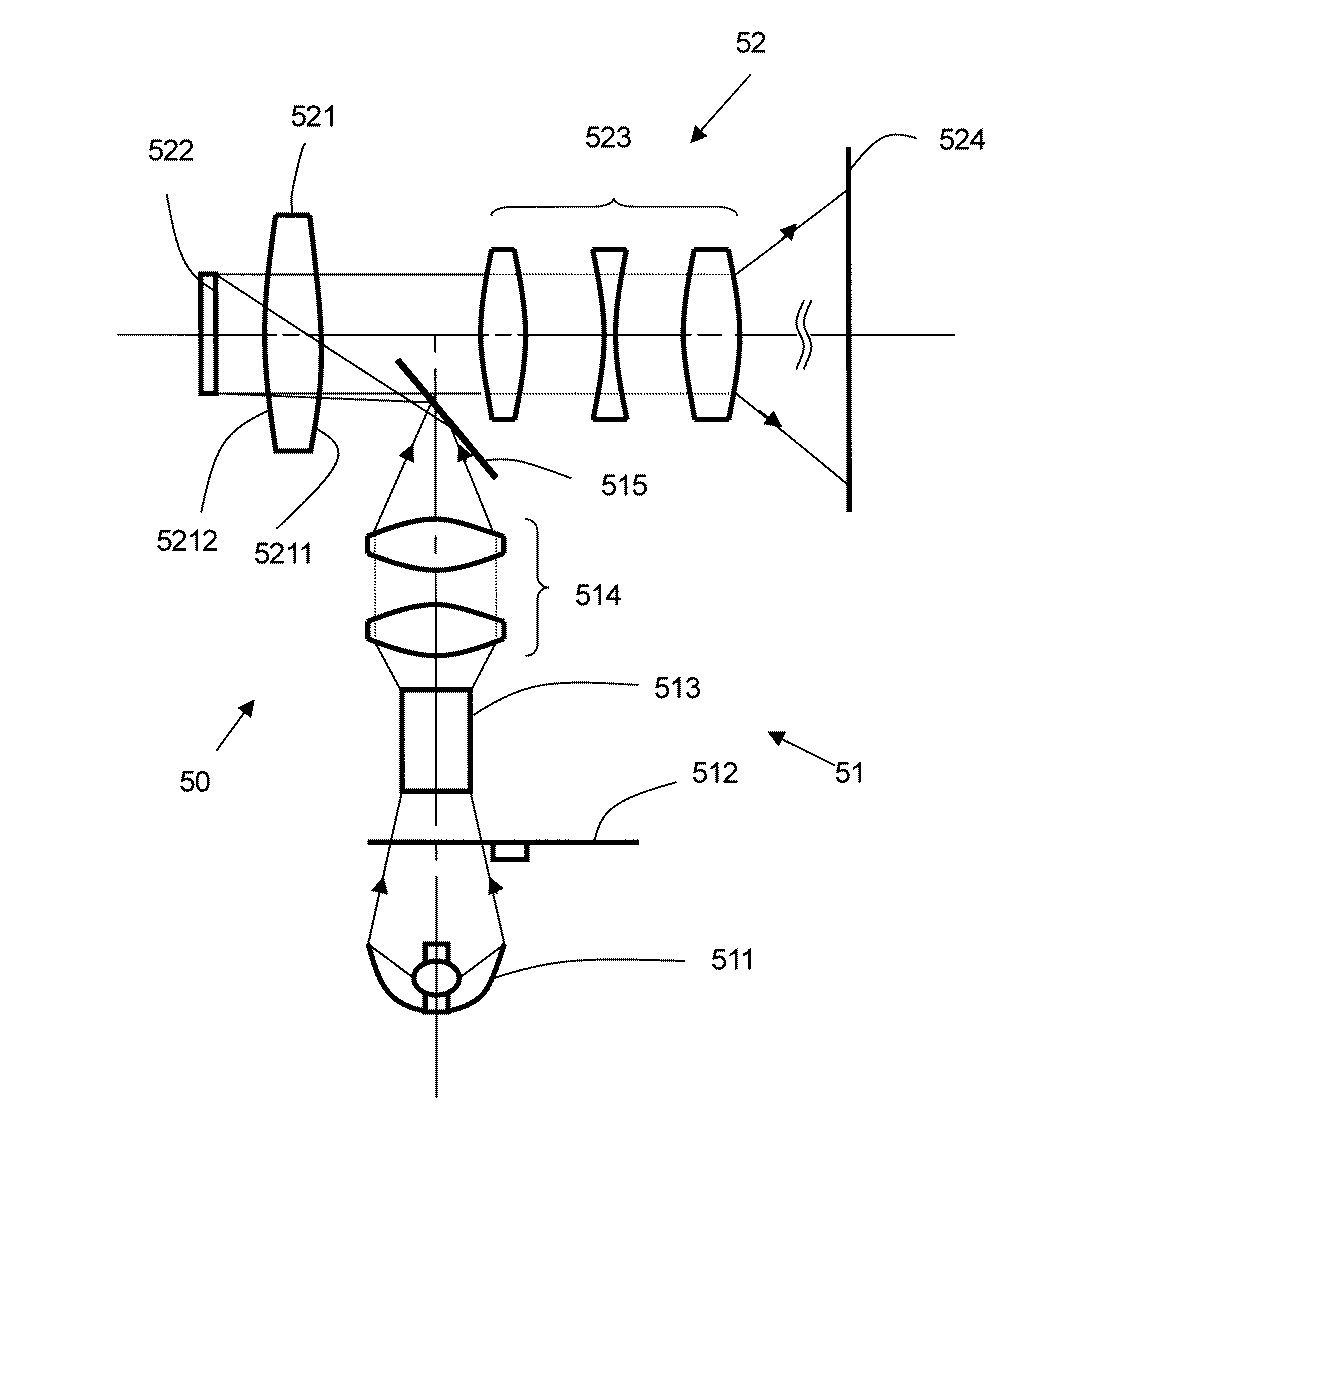 An illumination method and apparatus for projection system